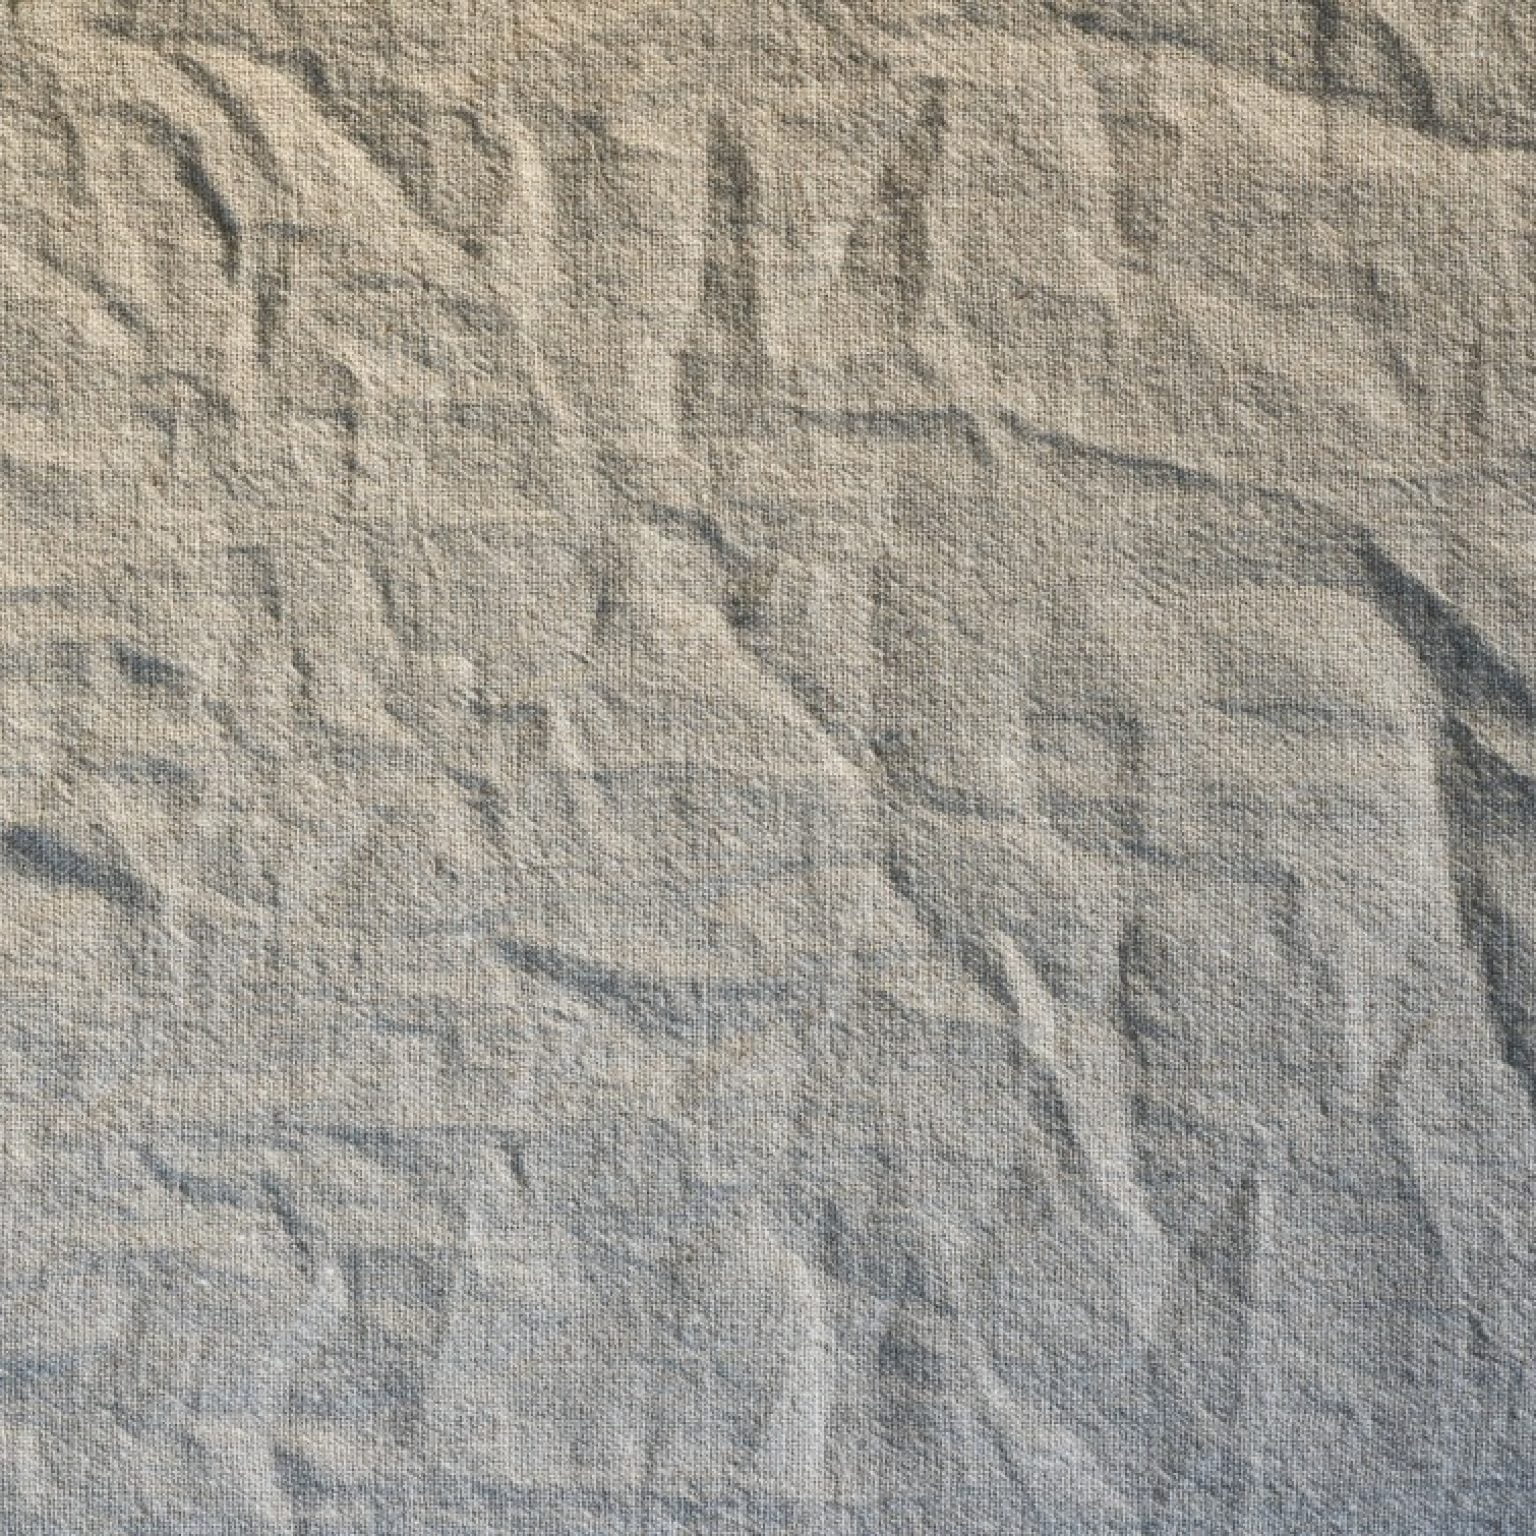 table background linen runner texture fabric hessian burlap white sack summer christmas canvas hemp t20 R0y0Ba They Create Loungewear Committed to Social Change